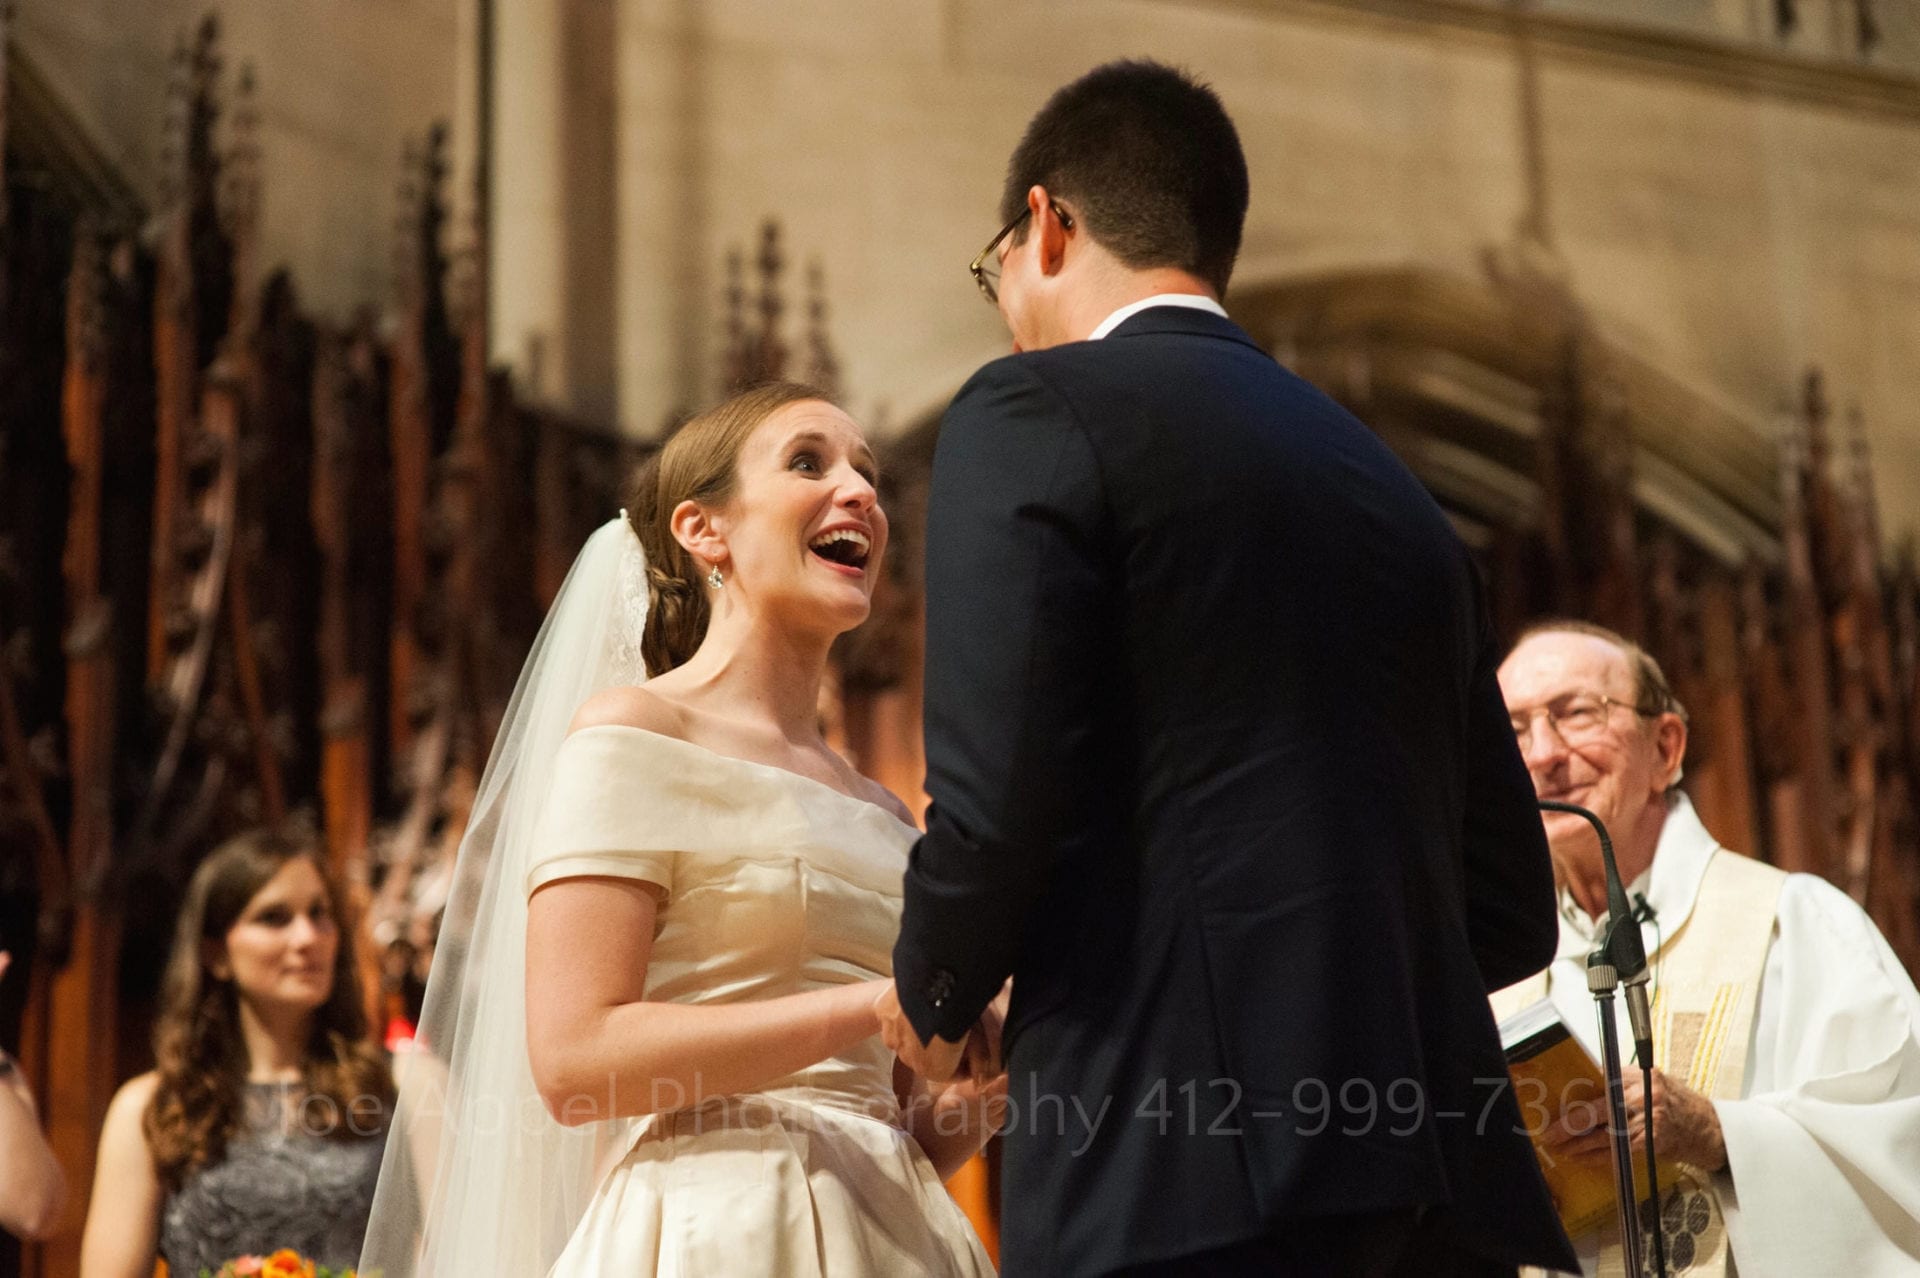 a bride smiles as she looks up at her groom as they face each other on an altar.